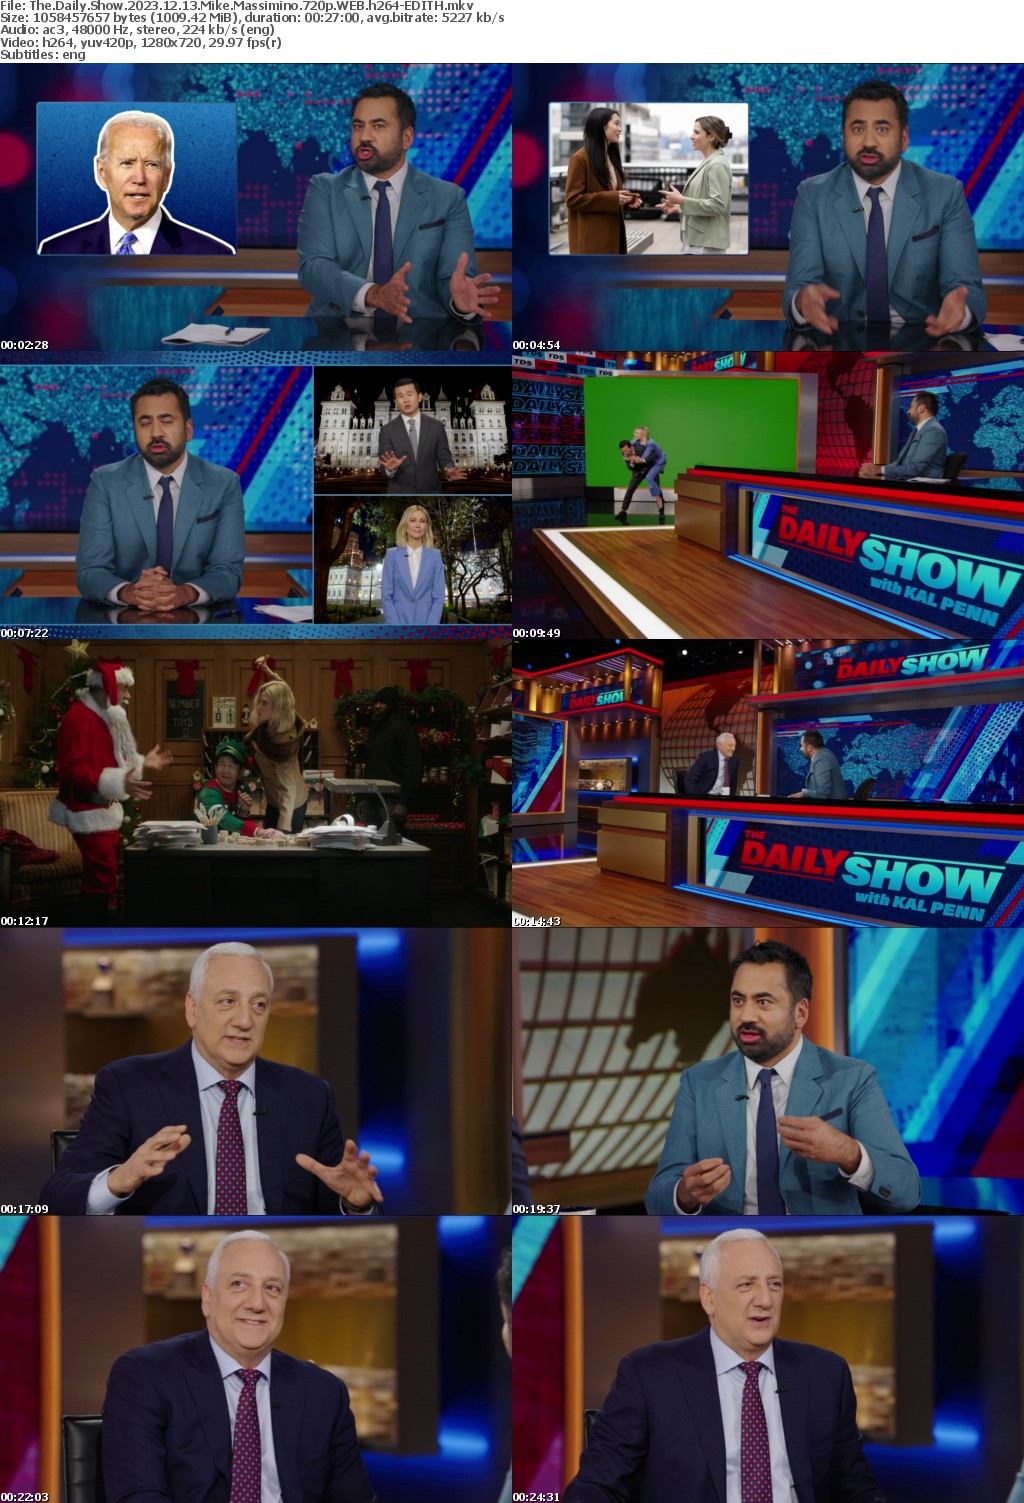 The Daily Show 2023 12 13 Mike Massimino 720p WEB h264-EDITH